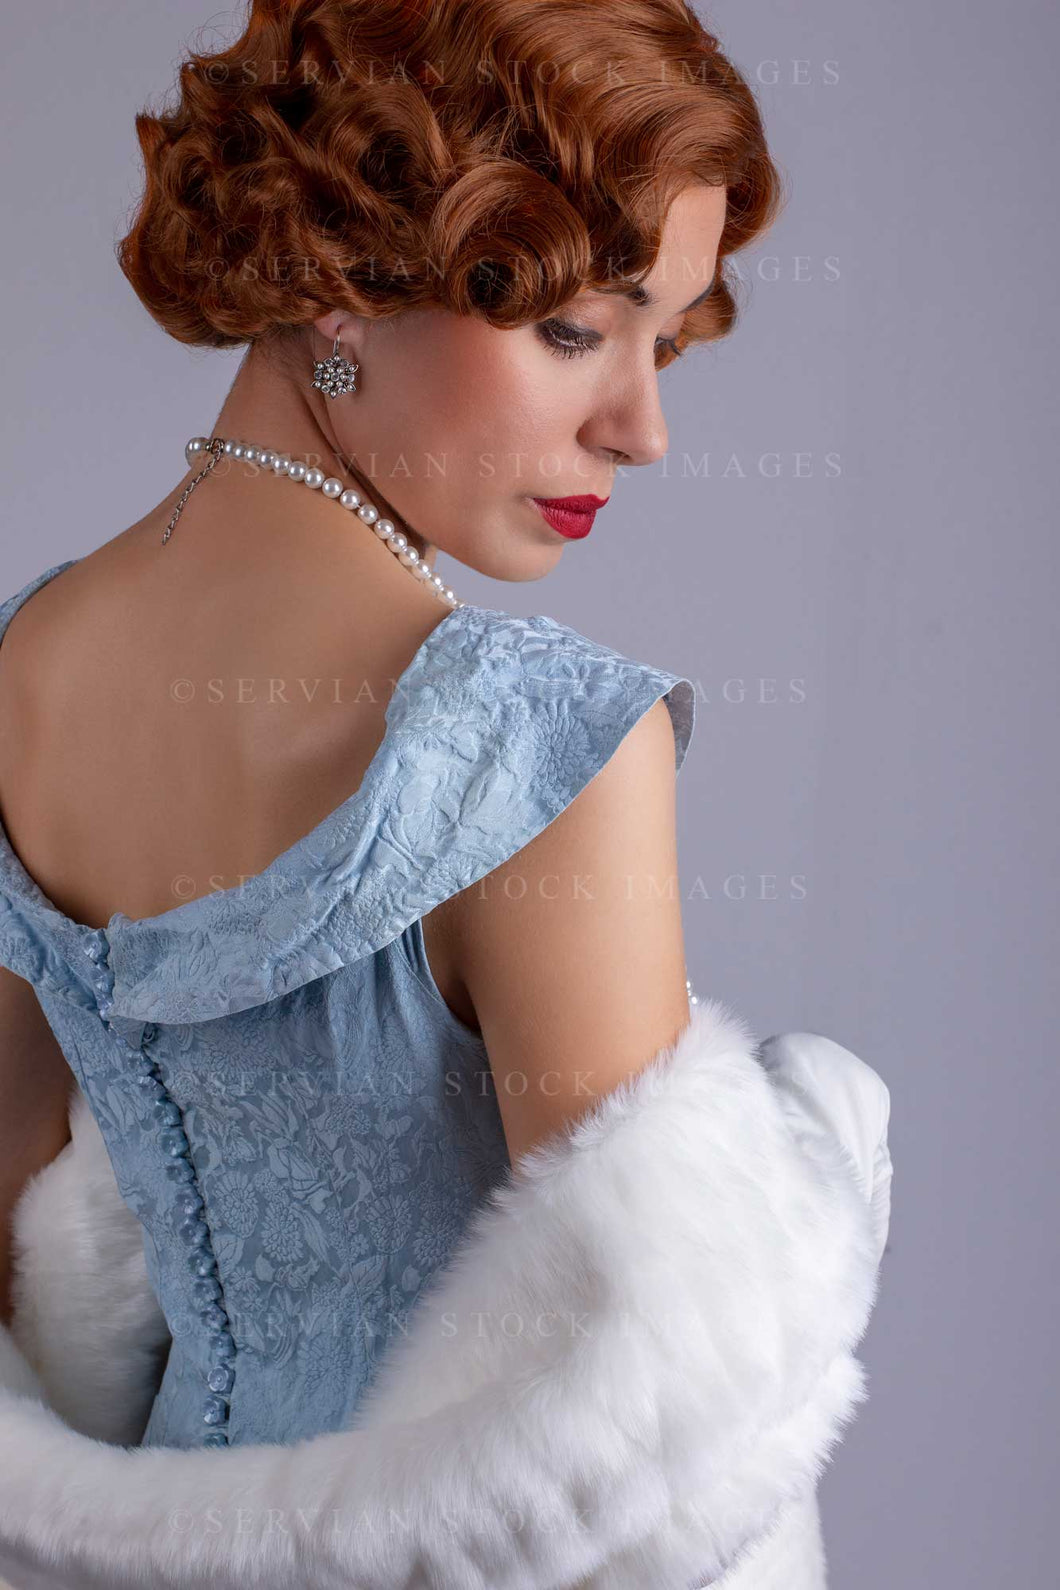 1930s woman wearing a blue vintage dress and a long string of pearls and white fur wrap (Sarah 0167)